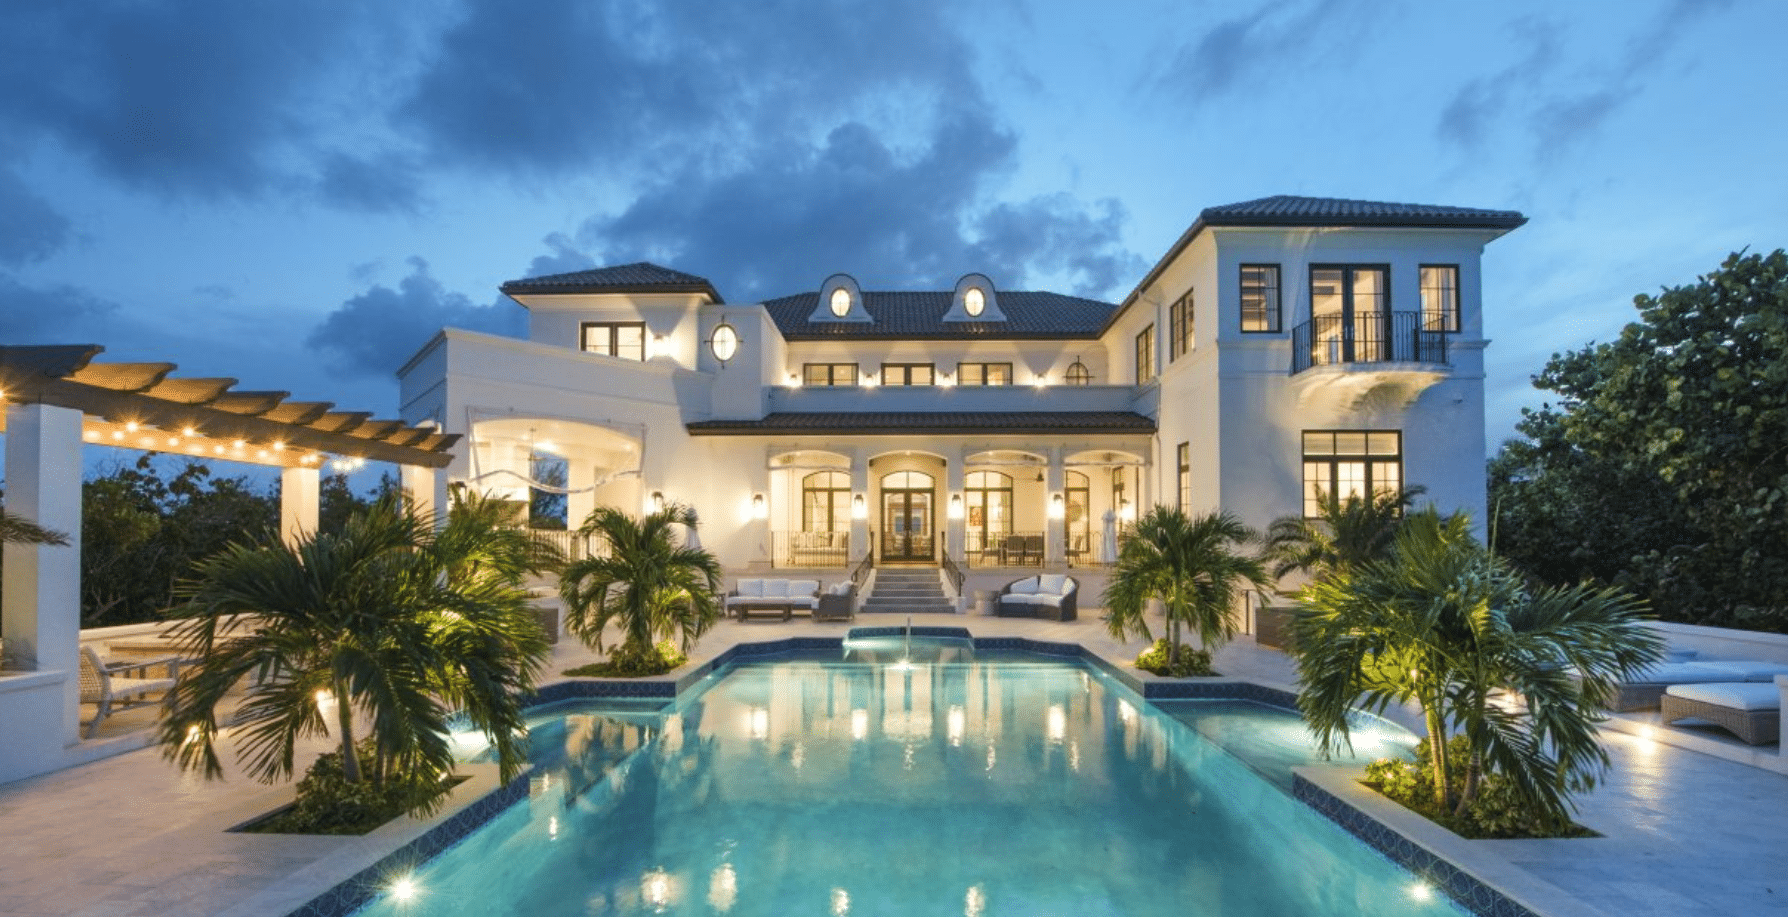 Jambo at Vista del Mar, exclusive property sold by Heather Carrigan, Cayman Islands Sotheby's International Realty